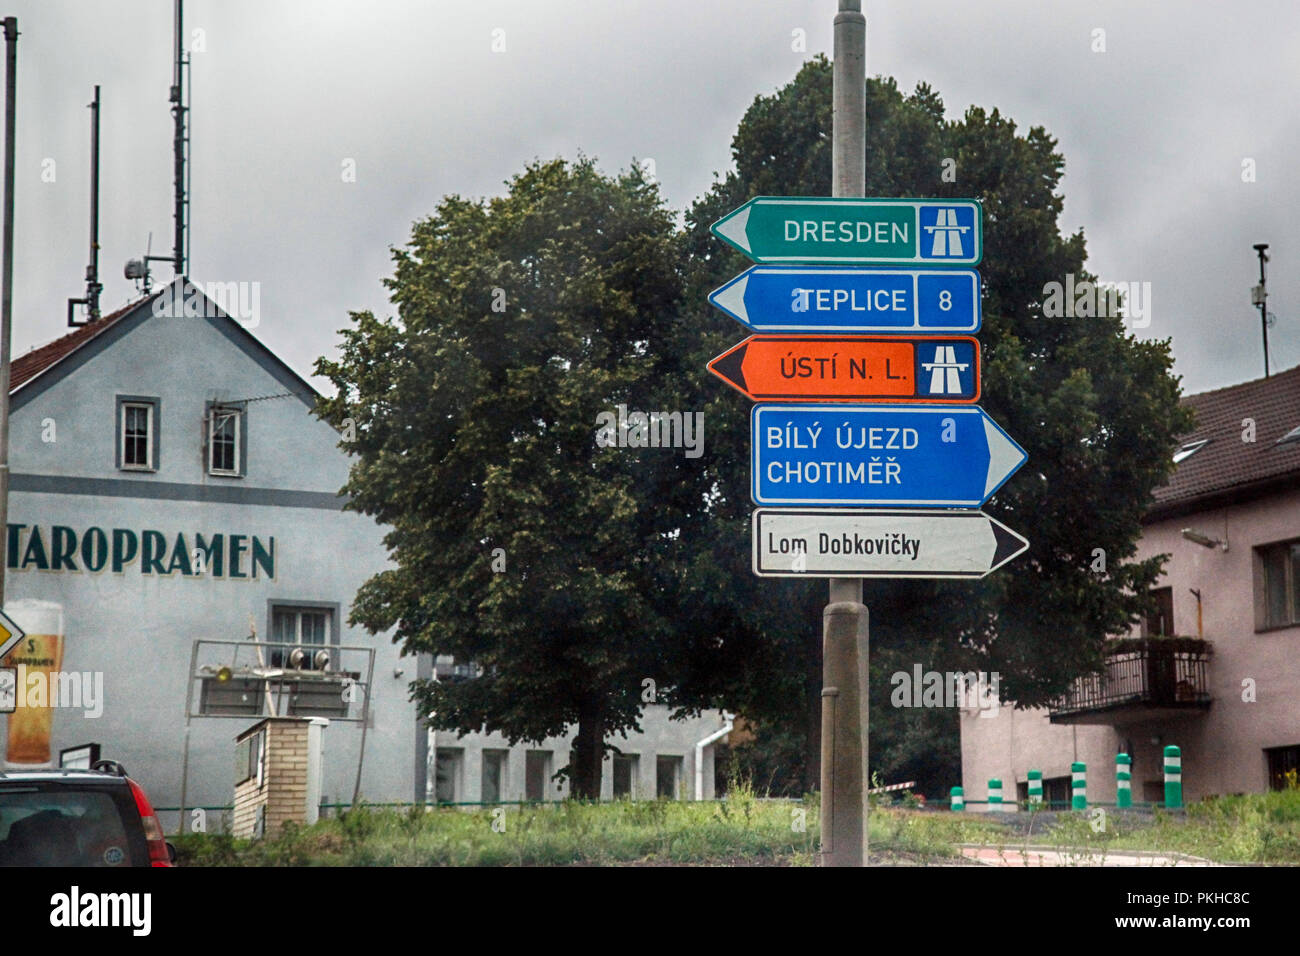 Multiple Traffic Signs On The Eu Border Of Hungary And Germany Near The Autobahn Towards Teplice And Dresden Stock Photo Alamy